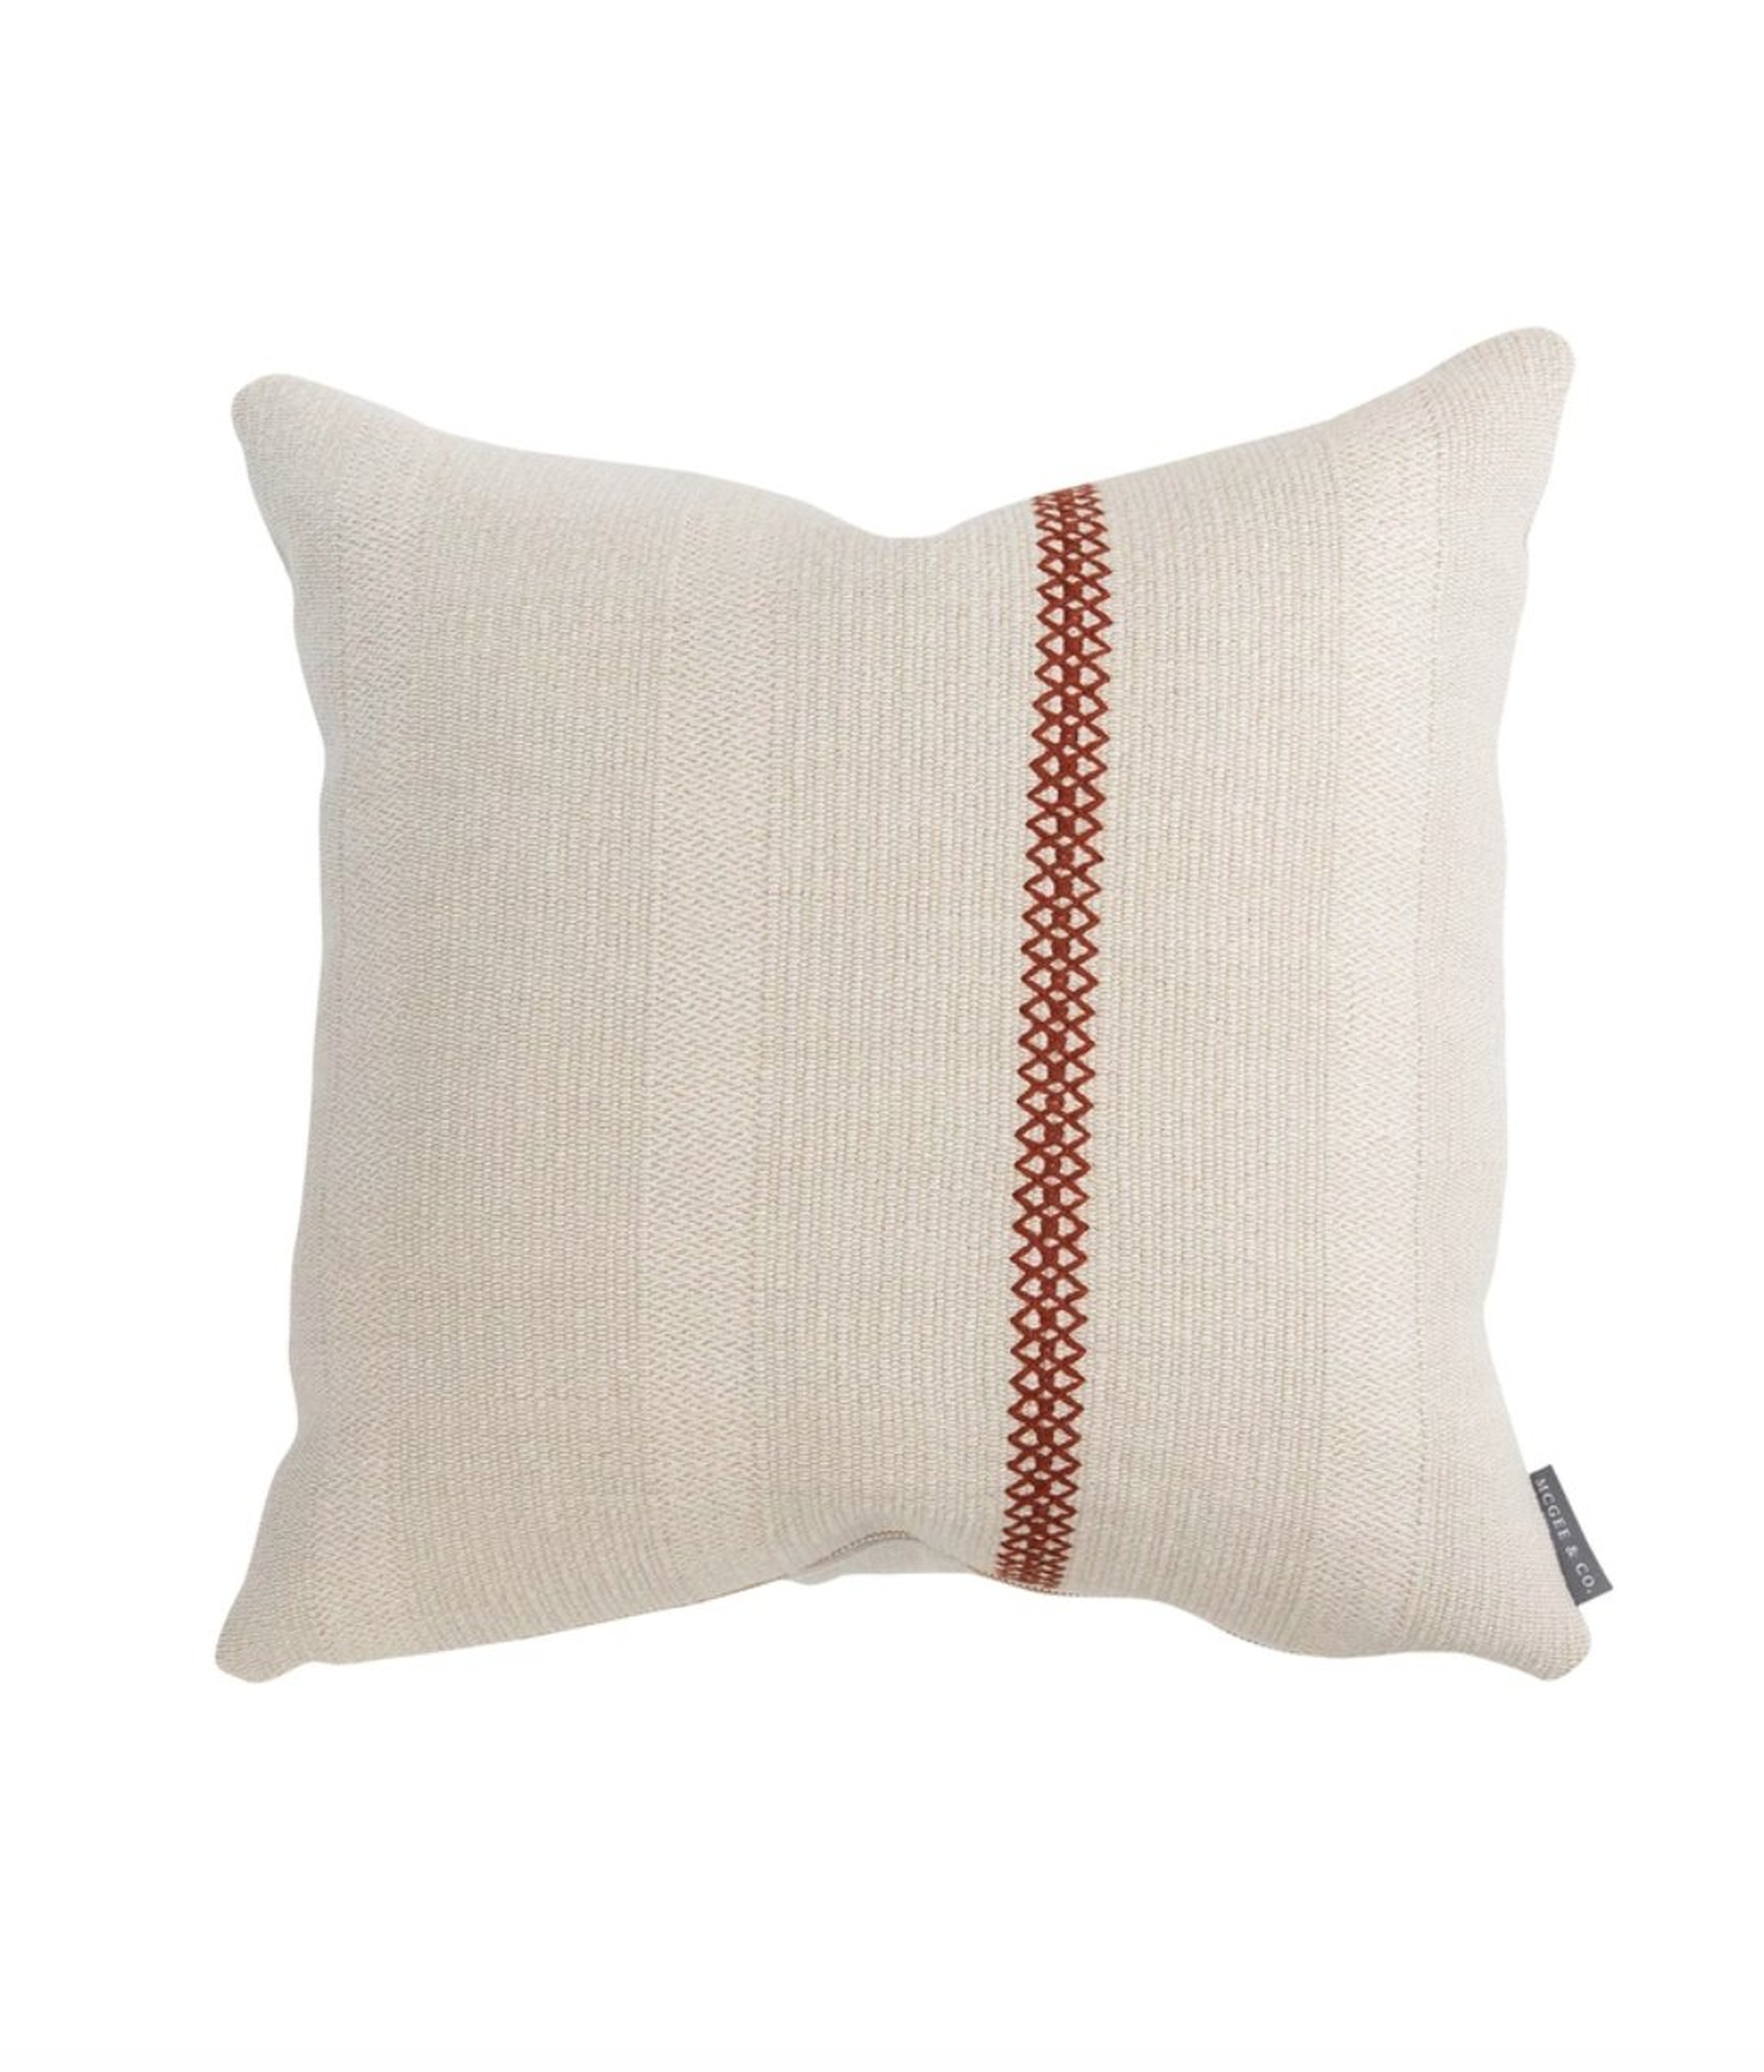 Willy Pillow Cover - McGee & Co.